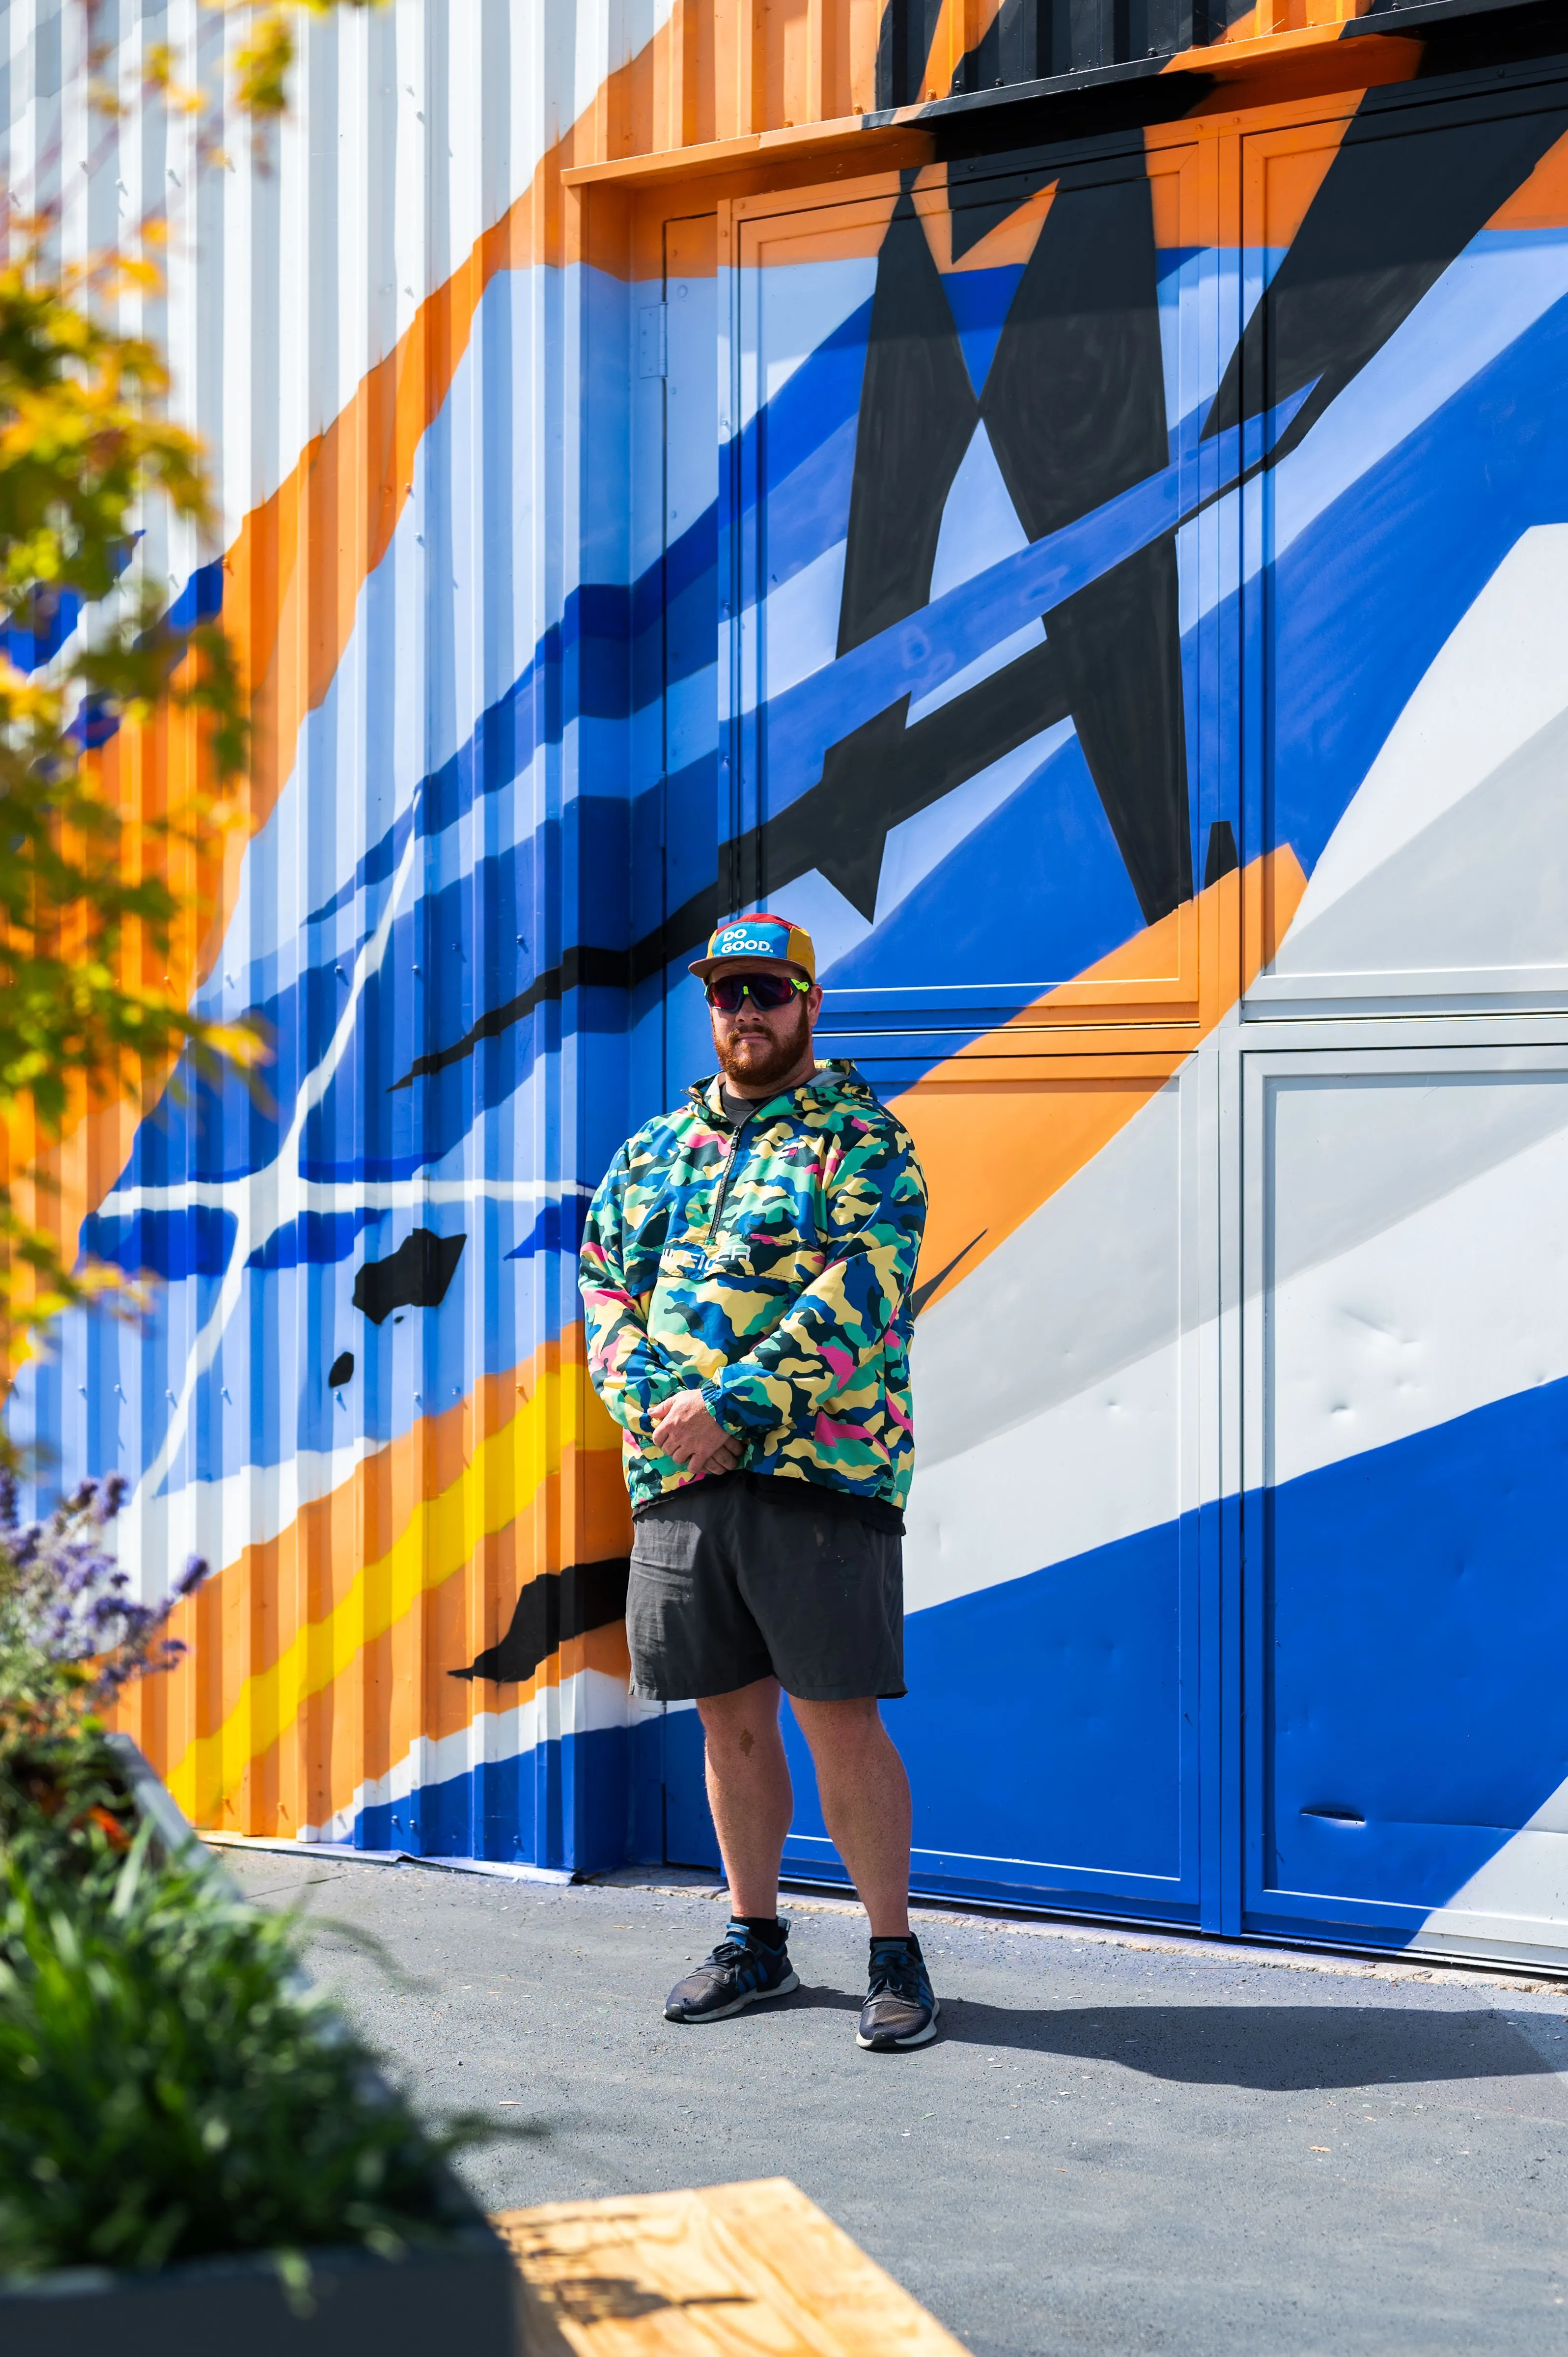 Man standing in front of a colorful container wall with an abstract design, wearing a camouflage jacket, shorts, sunglasses, and a cap.